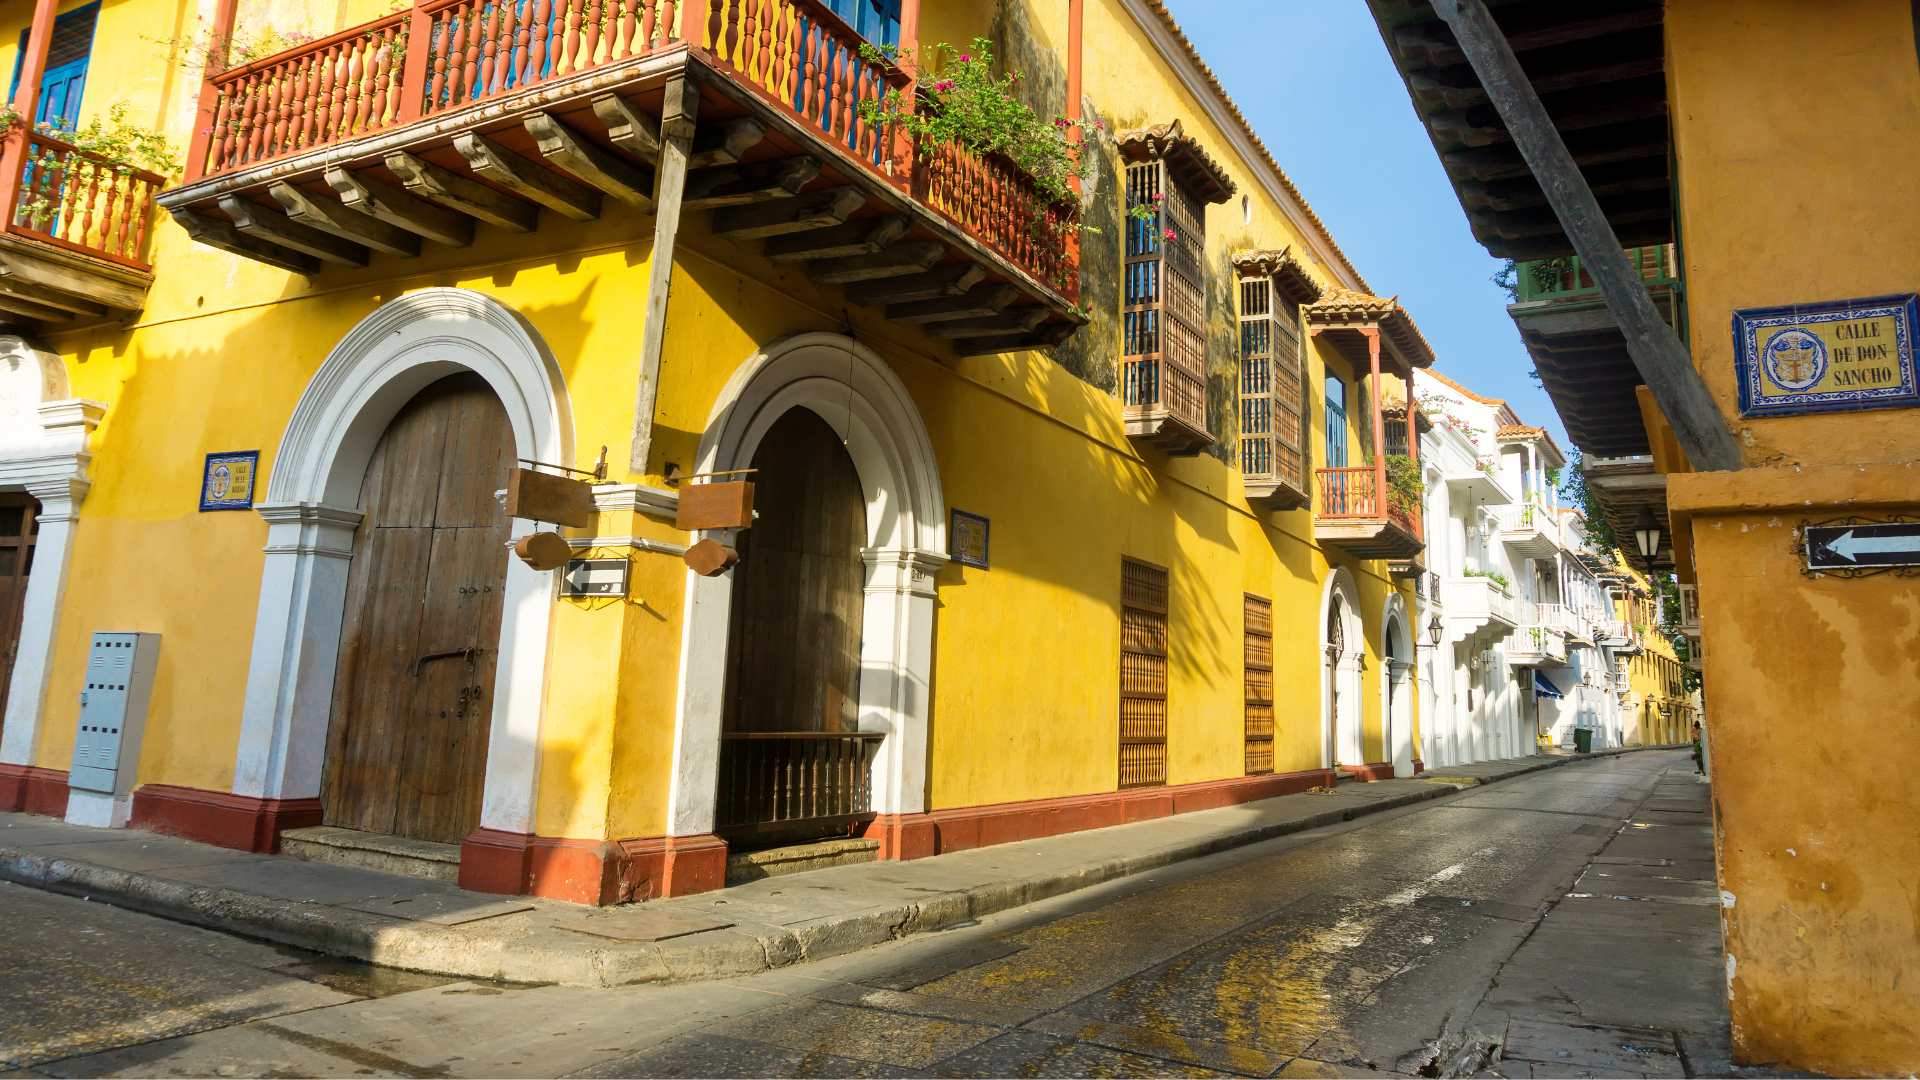 Cartagena is one of the most walkable cities in the world